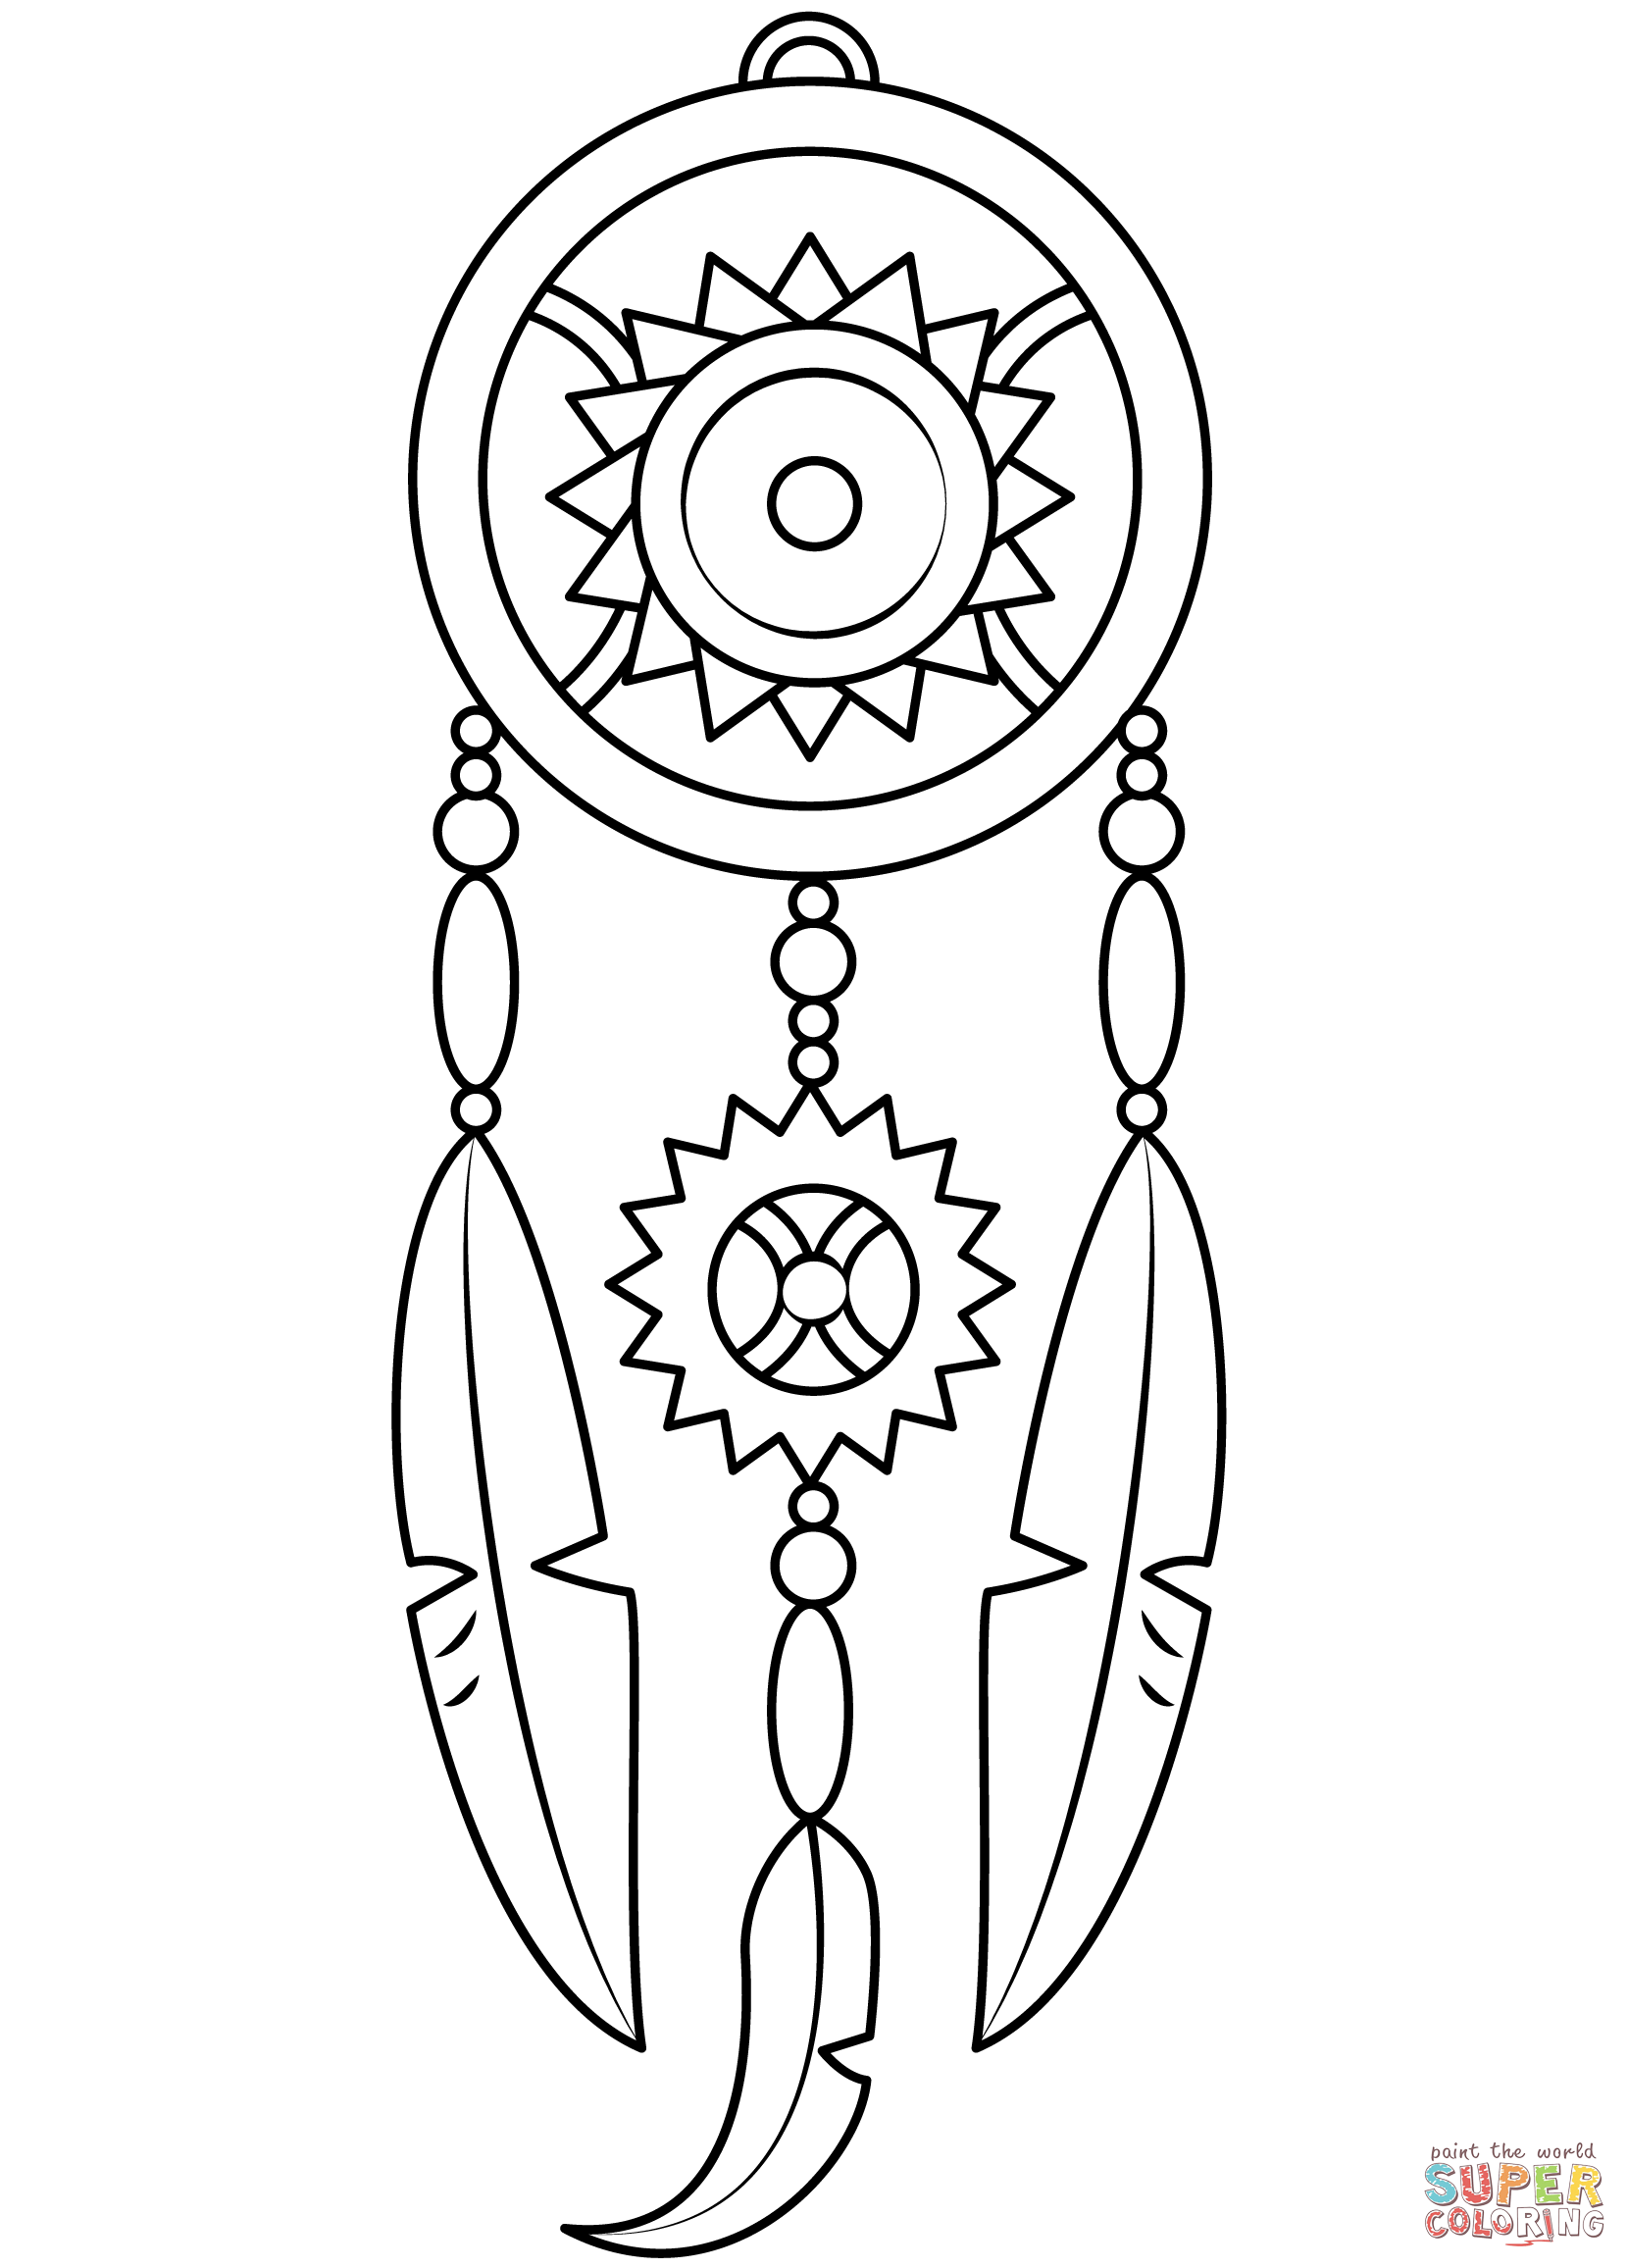 Dreamcatcher coloring page free printable coloring pages